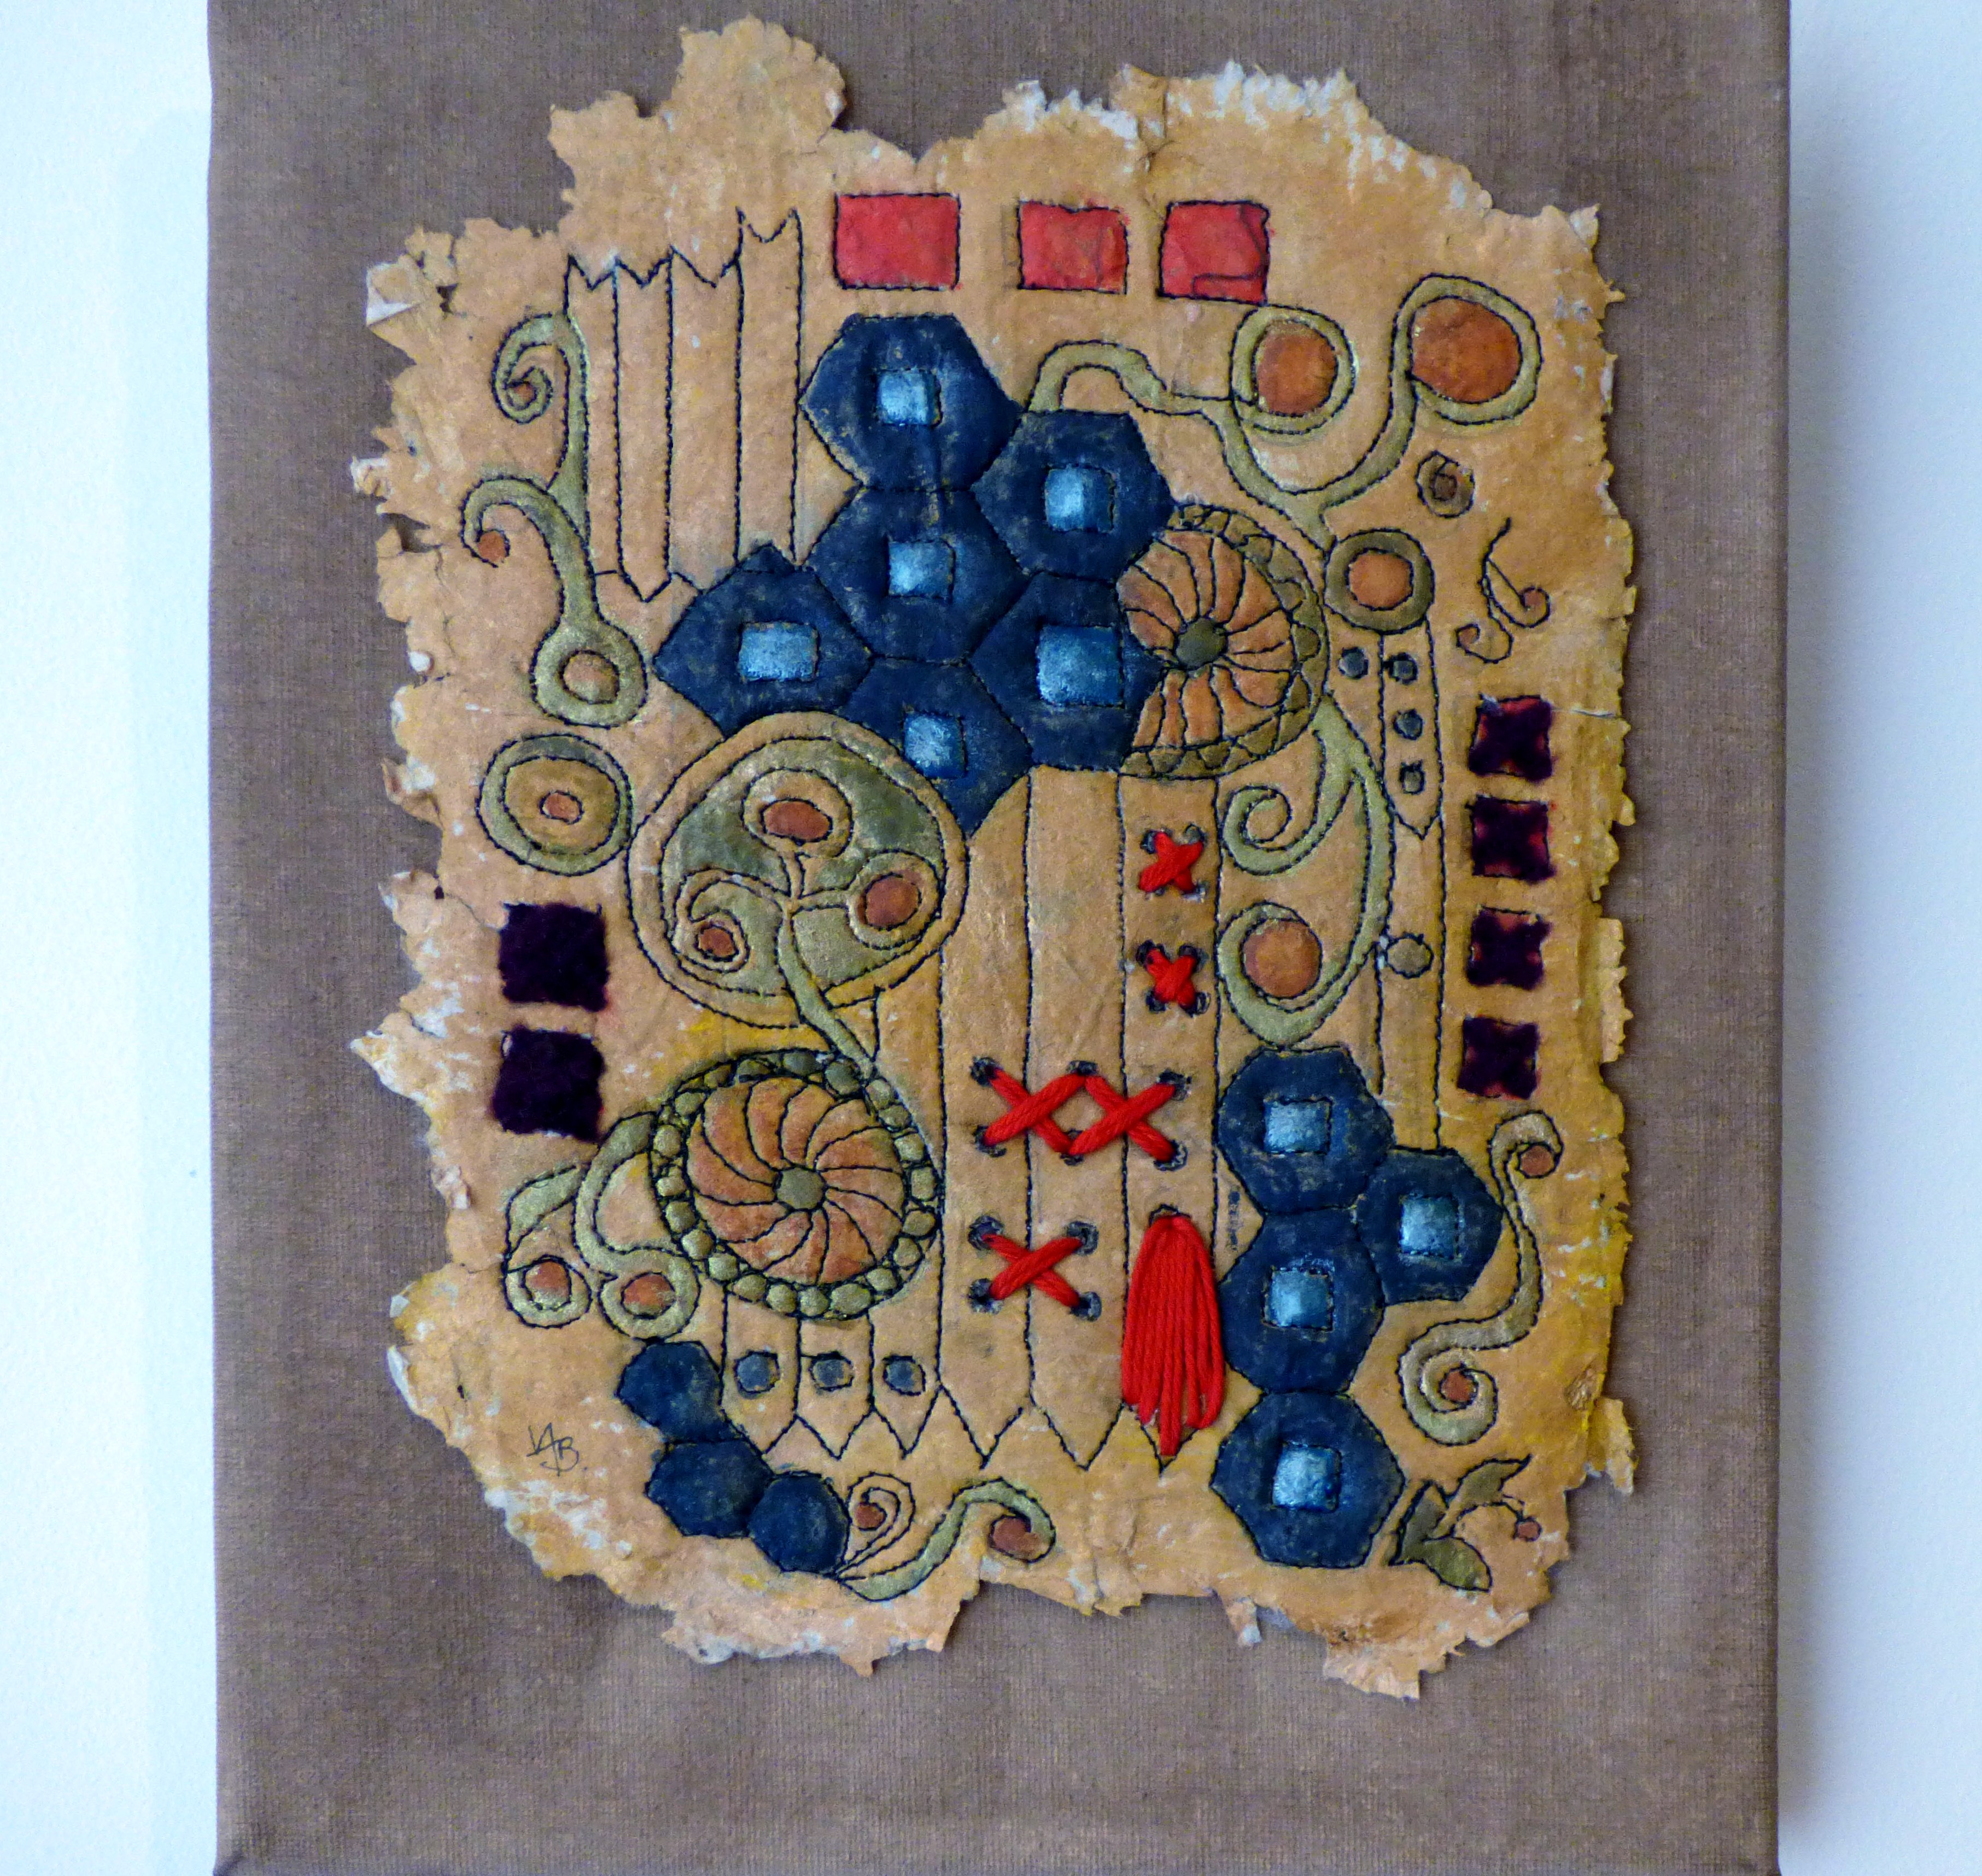 ARMORIAL FRAGMENTS 2 by Vivienne A. Brown, Textile Art Group exhibition, Leeds 2016